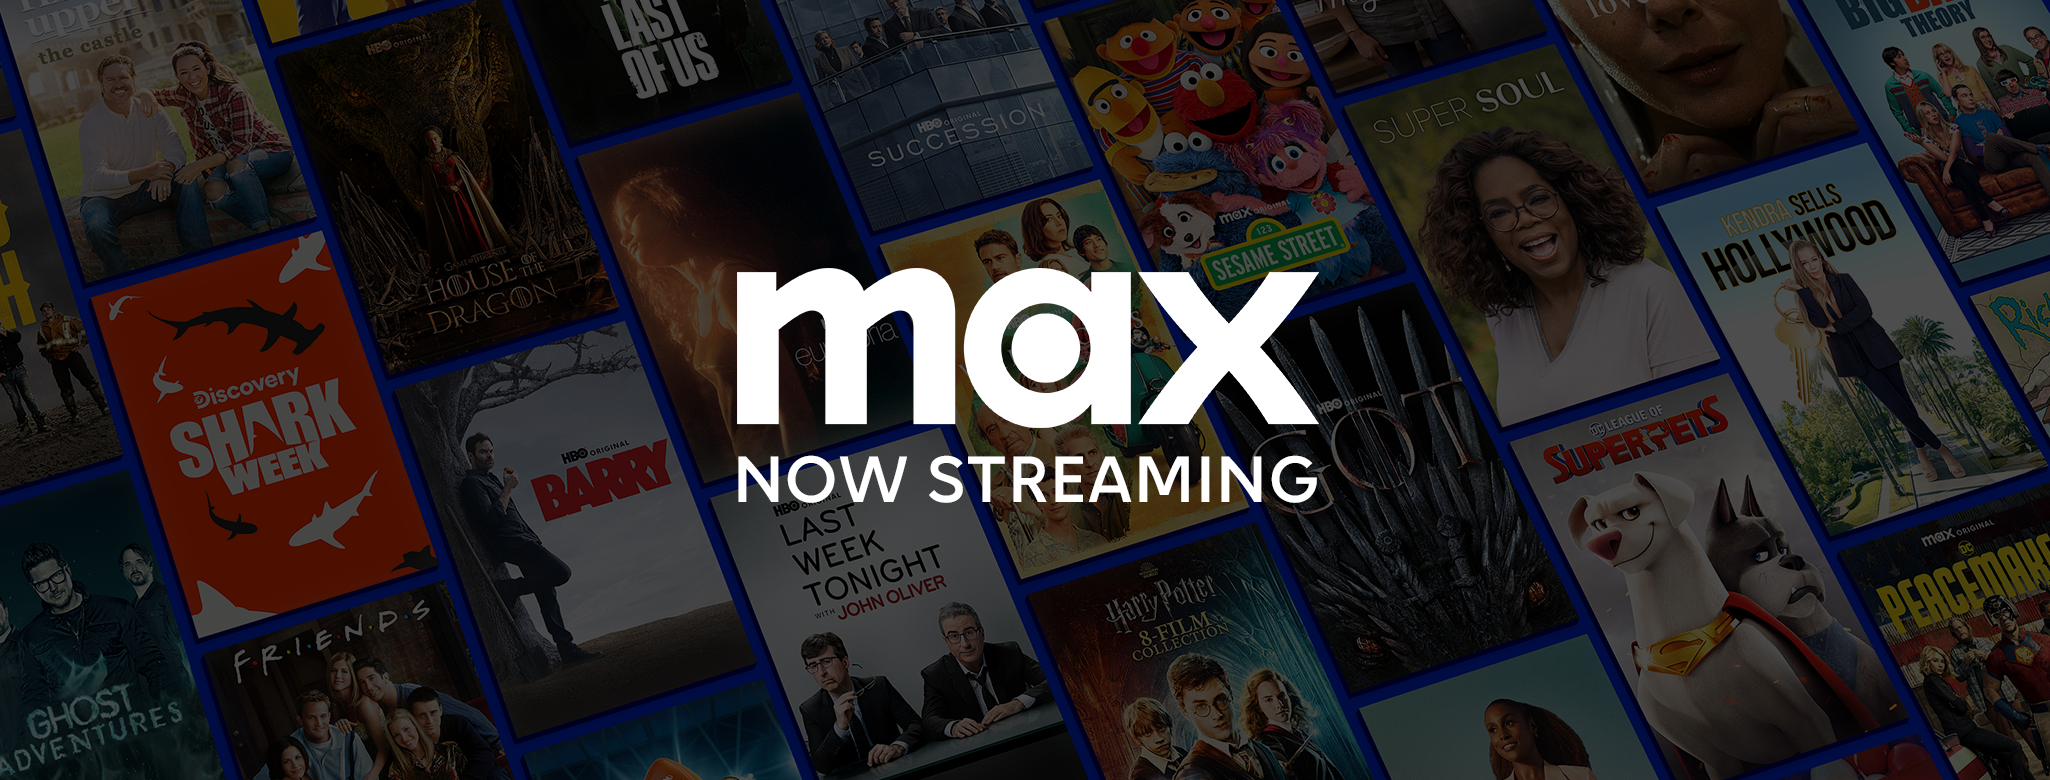 HBO Max: Release Date, Pricing, And More Original Content Revealed